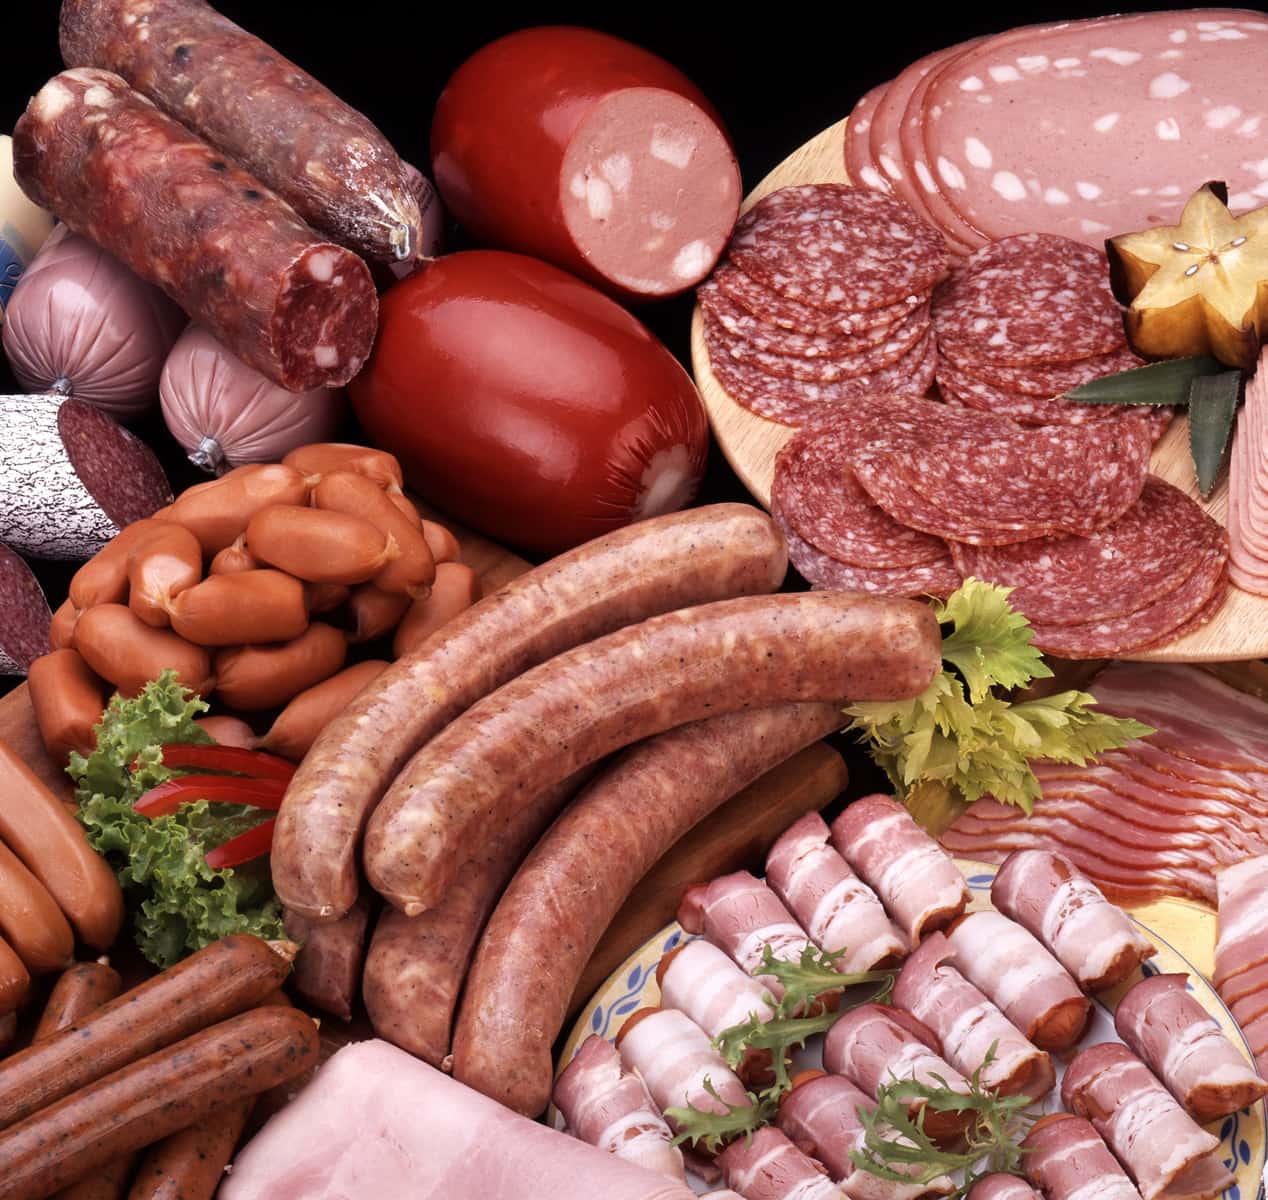 How Much Saturated Fat Is In That Processed Meat